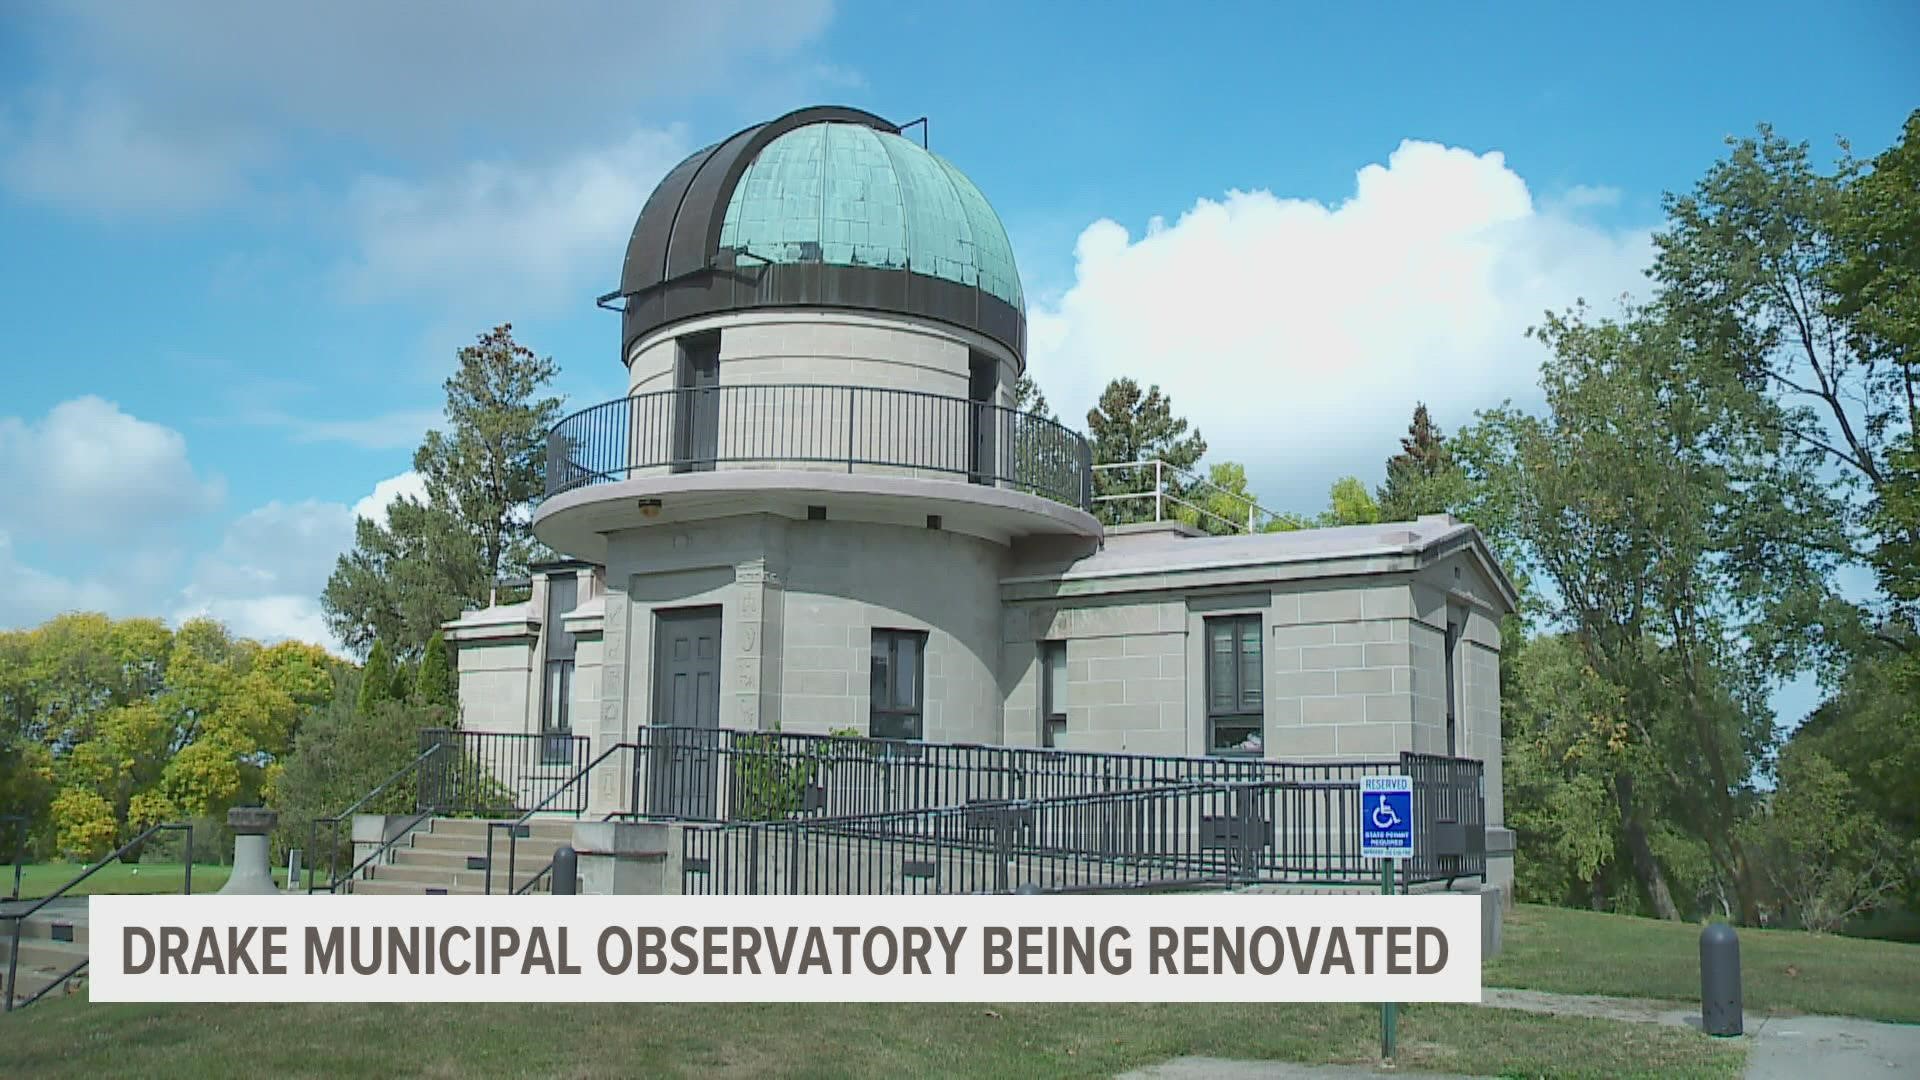 The observatory is working to upgrade its telescope, which hasn't had a major renovation since the 1990s.